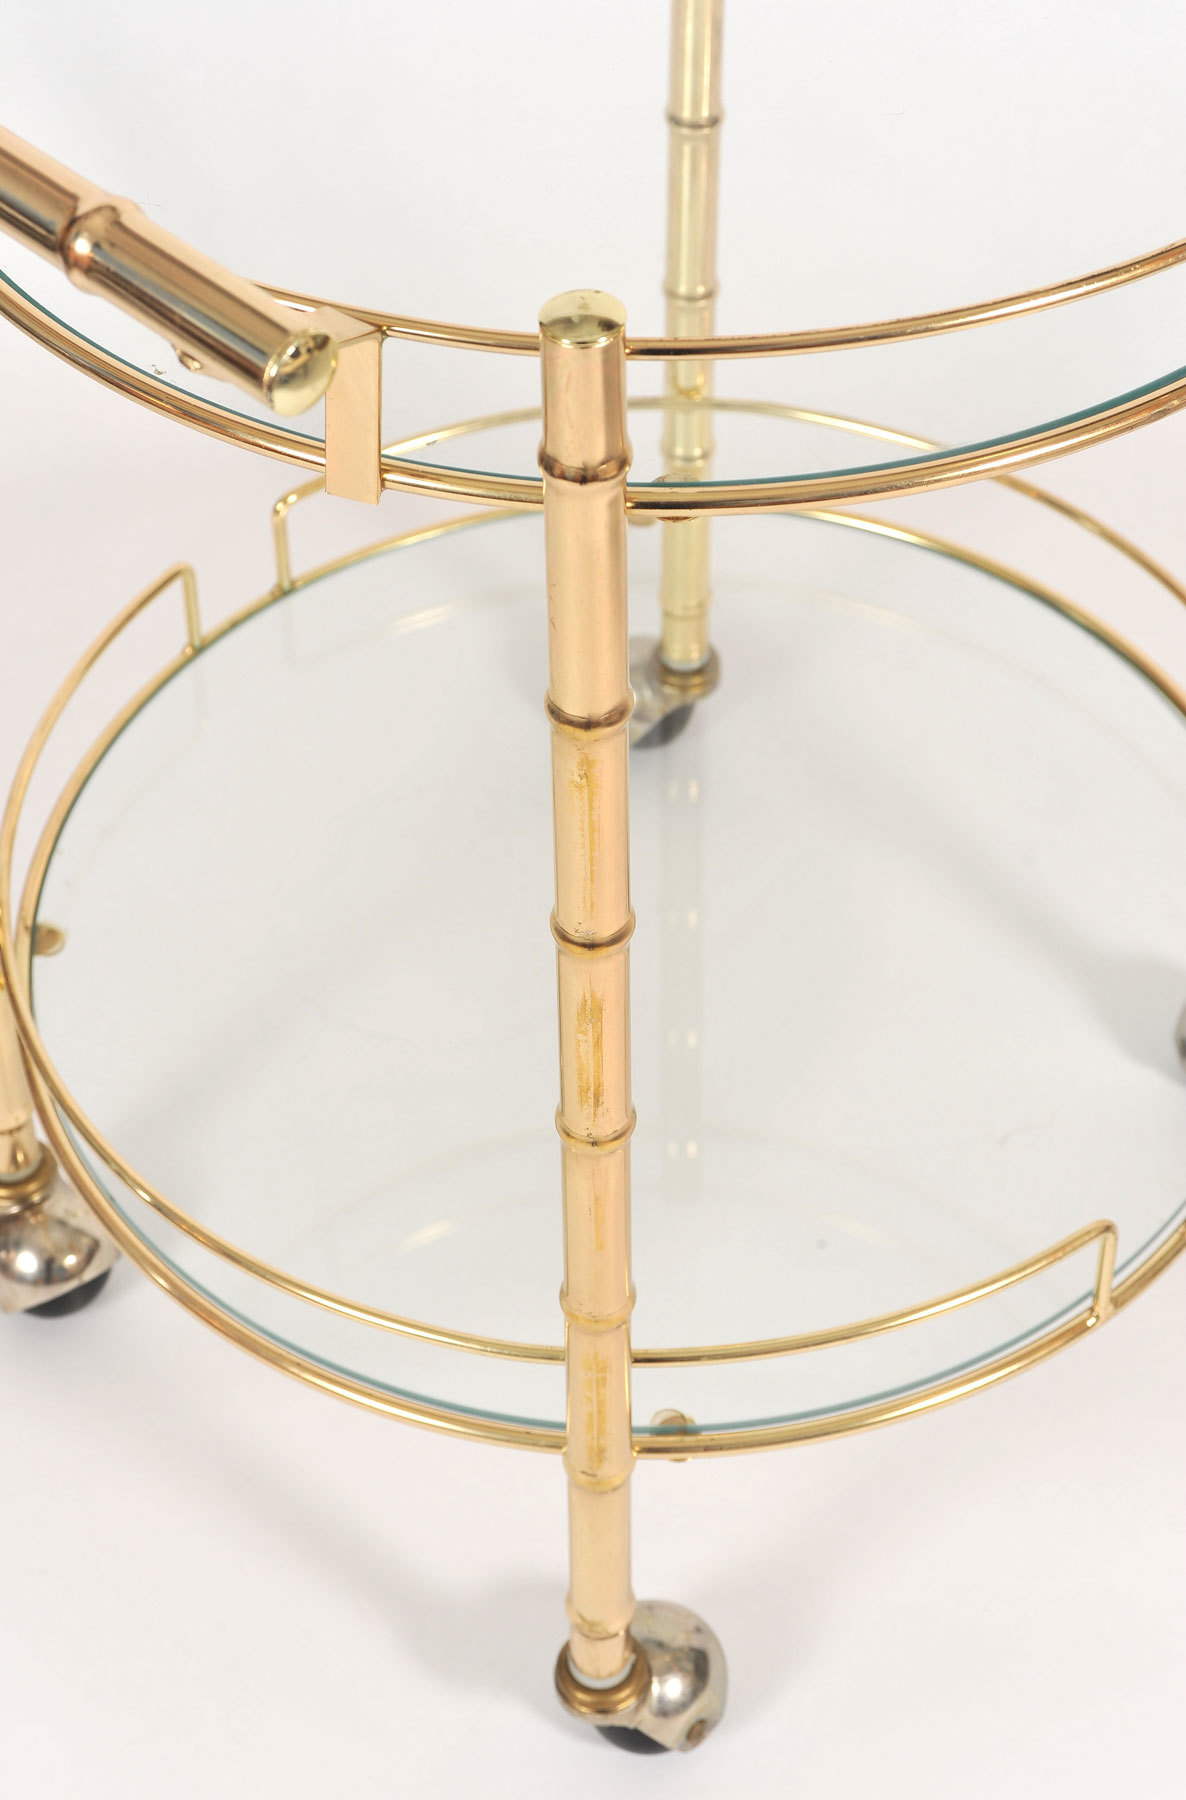 The image for Circular Brass Trolley 04